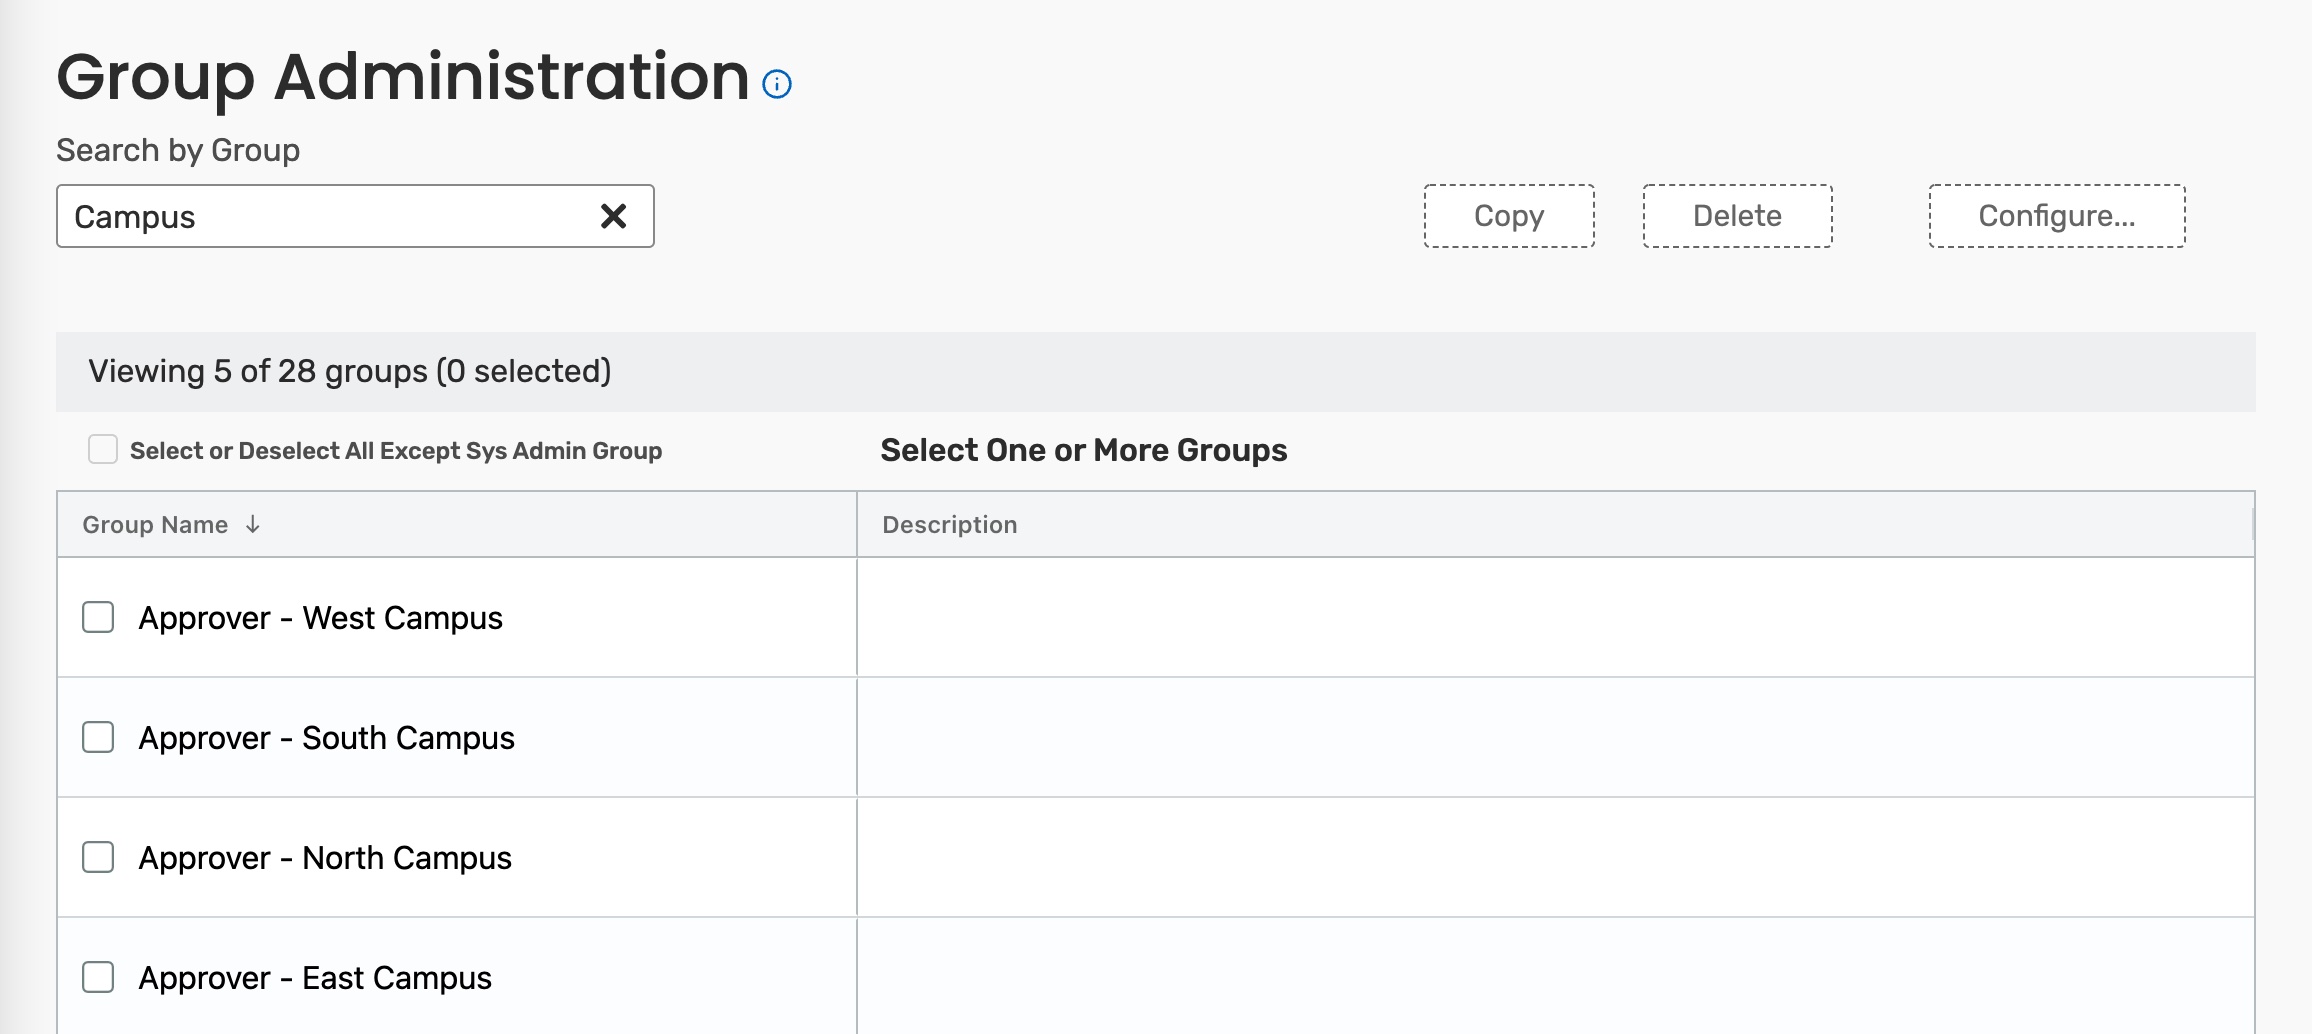 Using the search field to filter groups by Group Name.